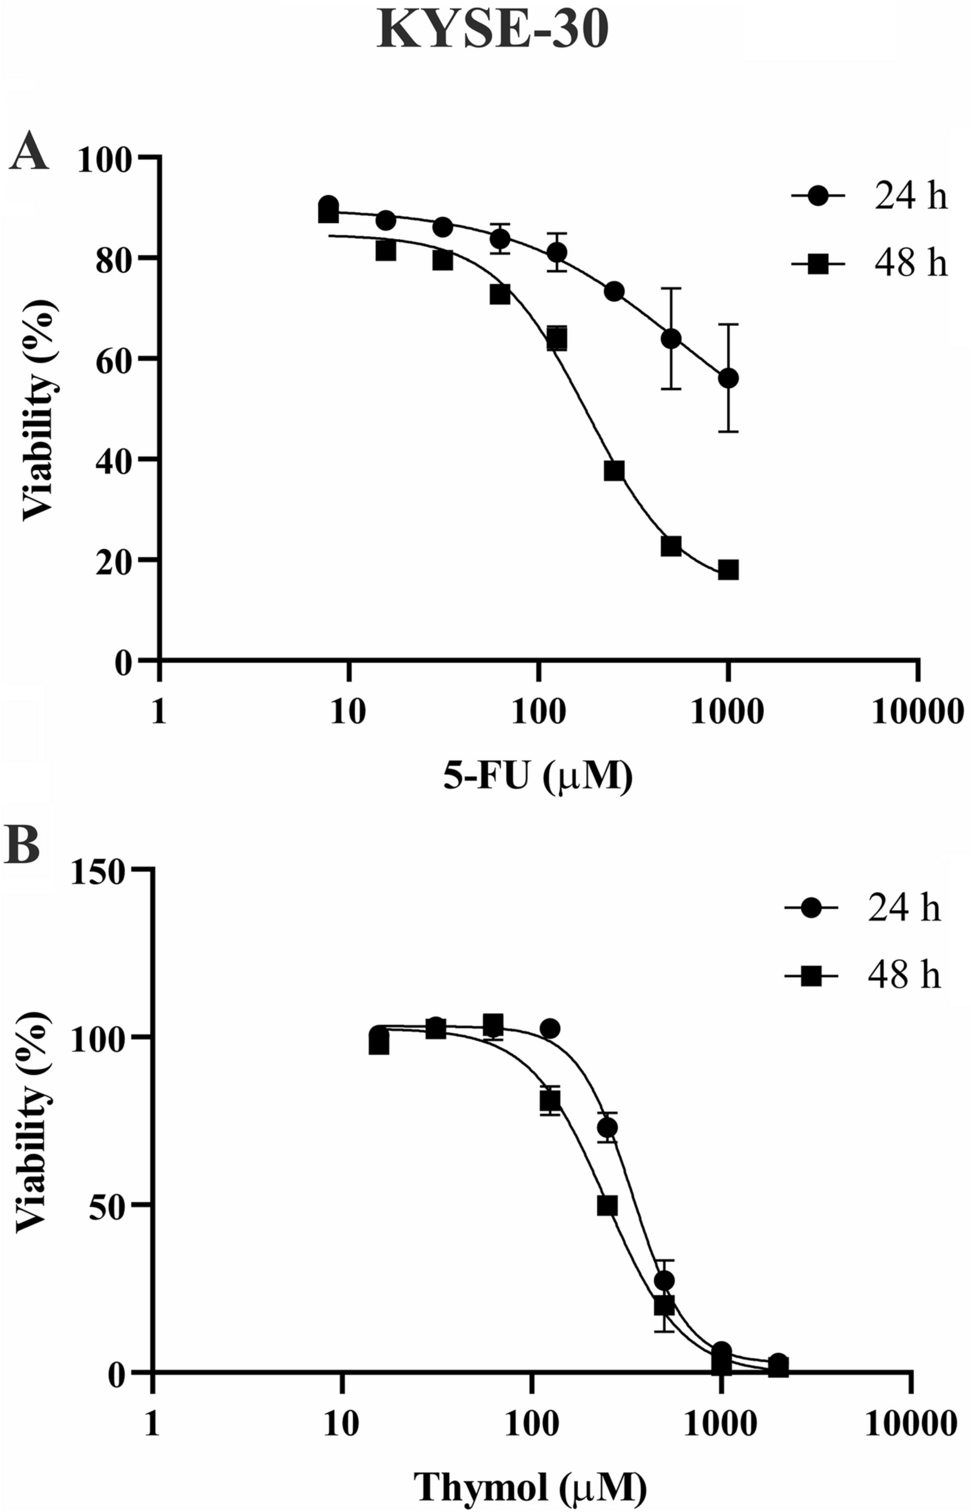 Thymol Enhances 5-Fluorouracil Cytotoxicity by Reducing Migration and Increasing Apoptosis and Cell Cycle Arrest in Esophageal Cancer Cells: An In-vitro Study